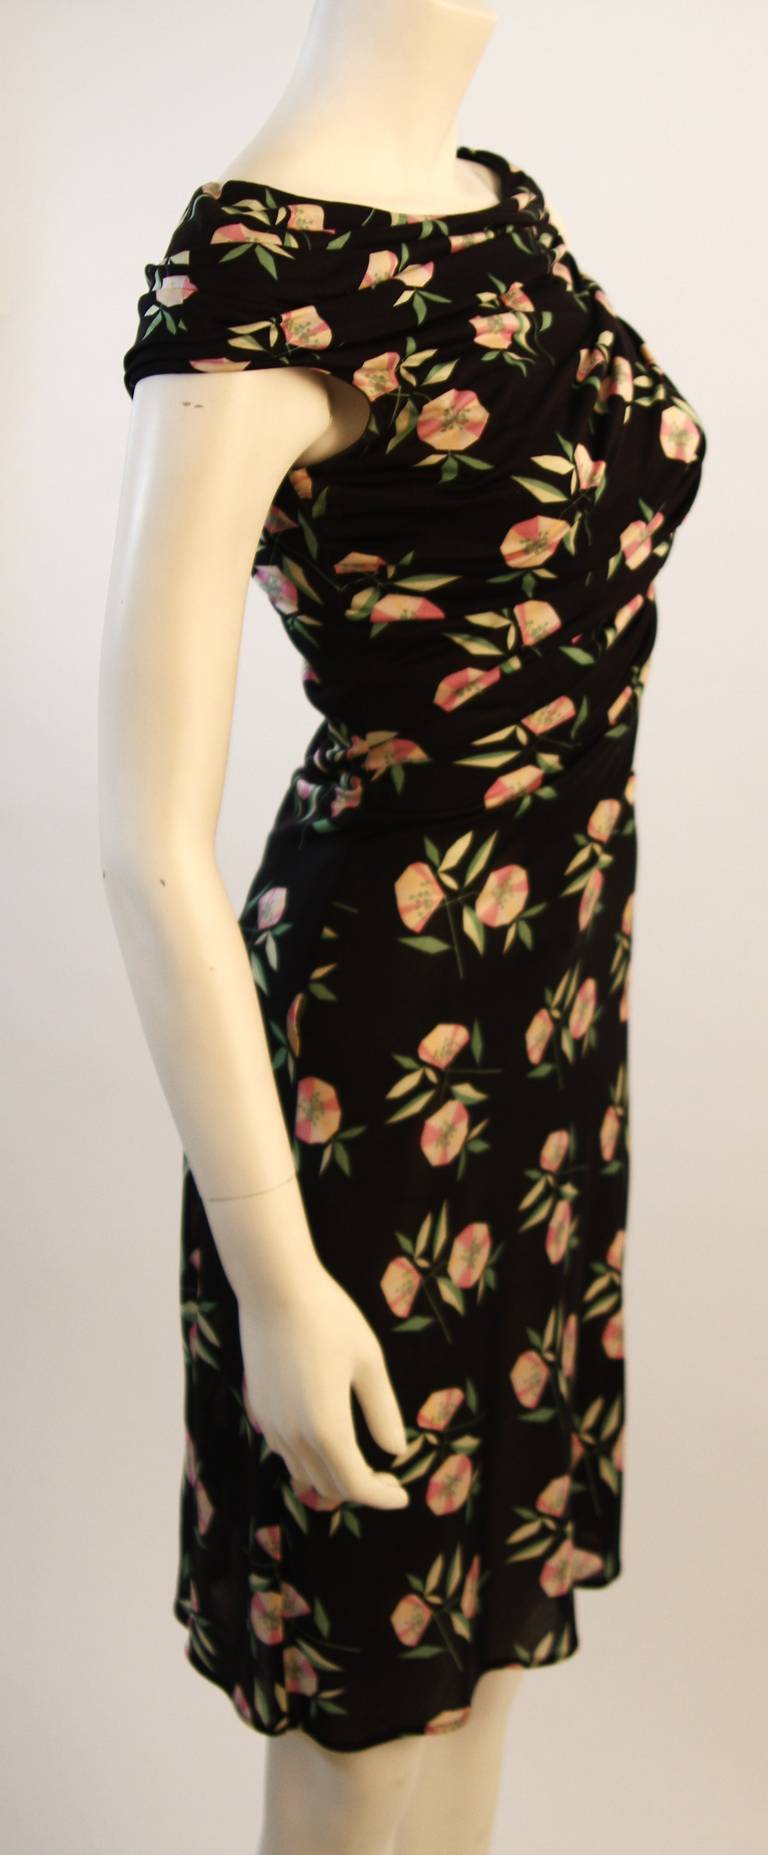 Gianni Versace Black with Pink Roses Ruched Silk Jersey Dress Size 40 For Sale 1